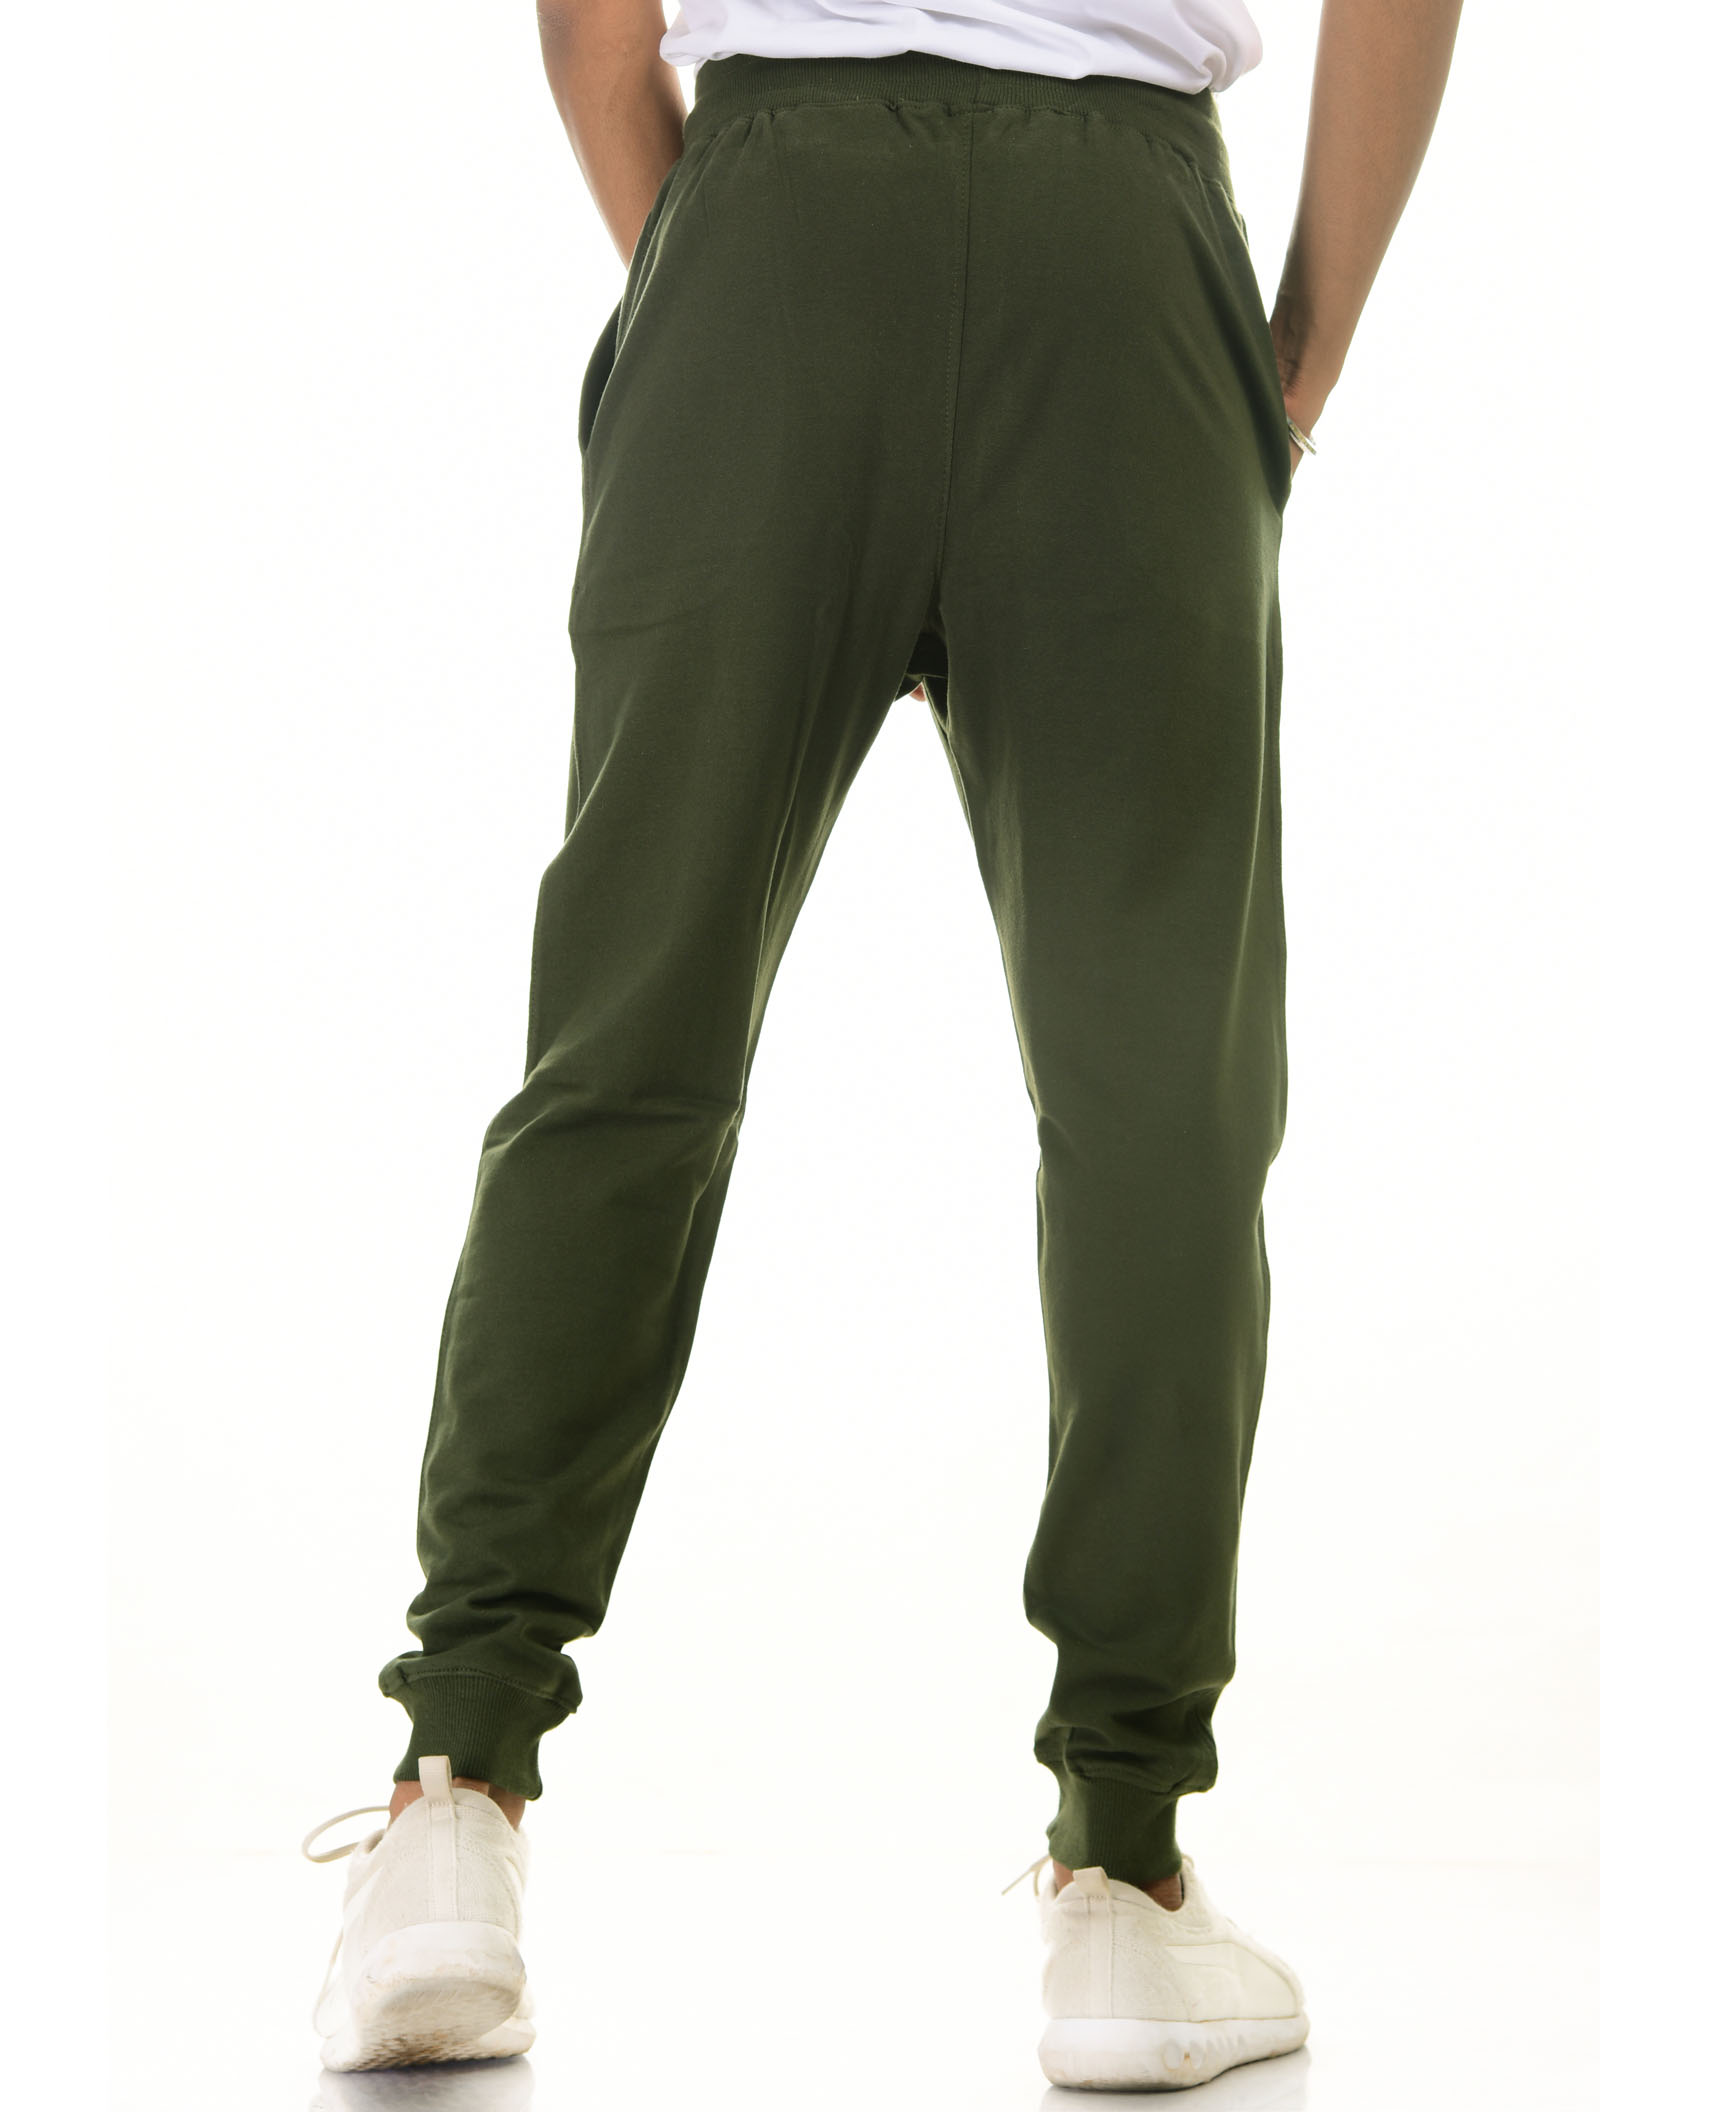 Men's Red Cotton Blend Solid Trackpants